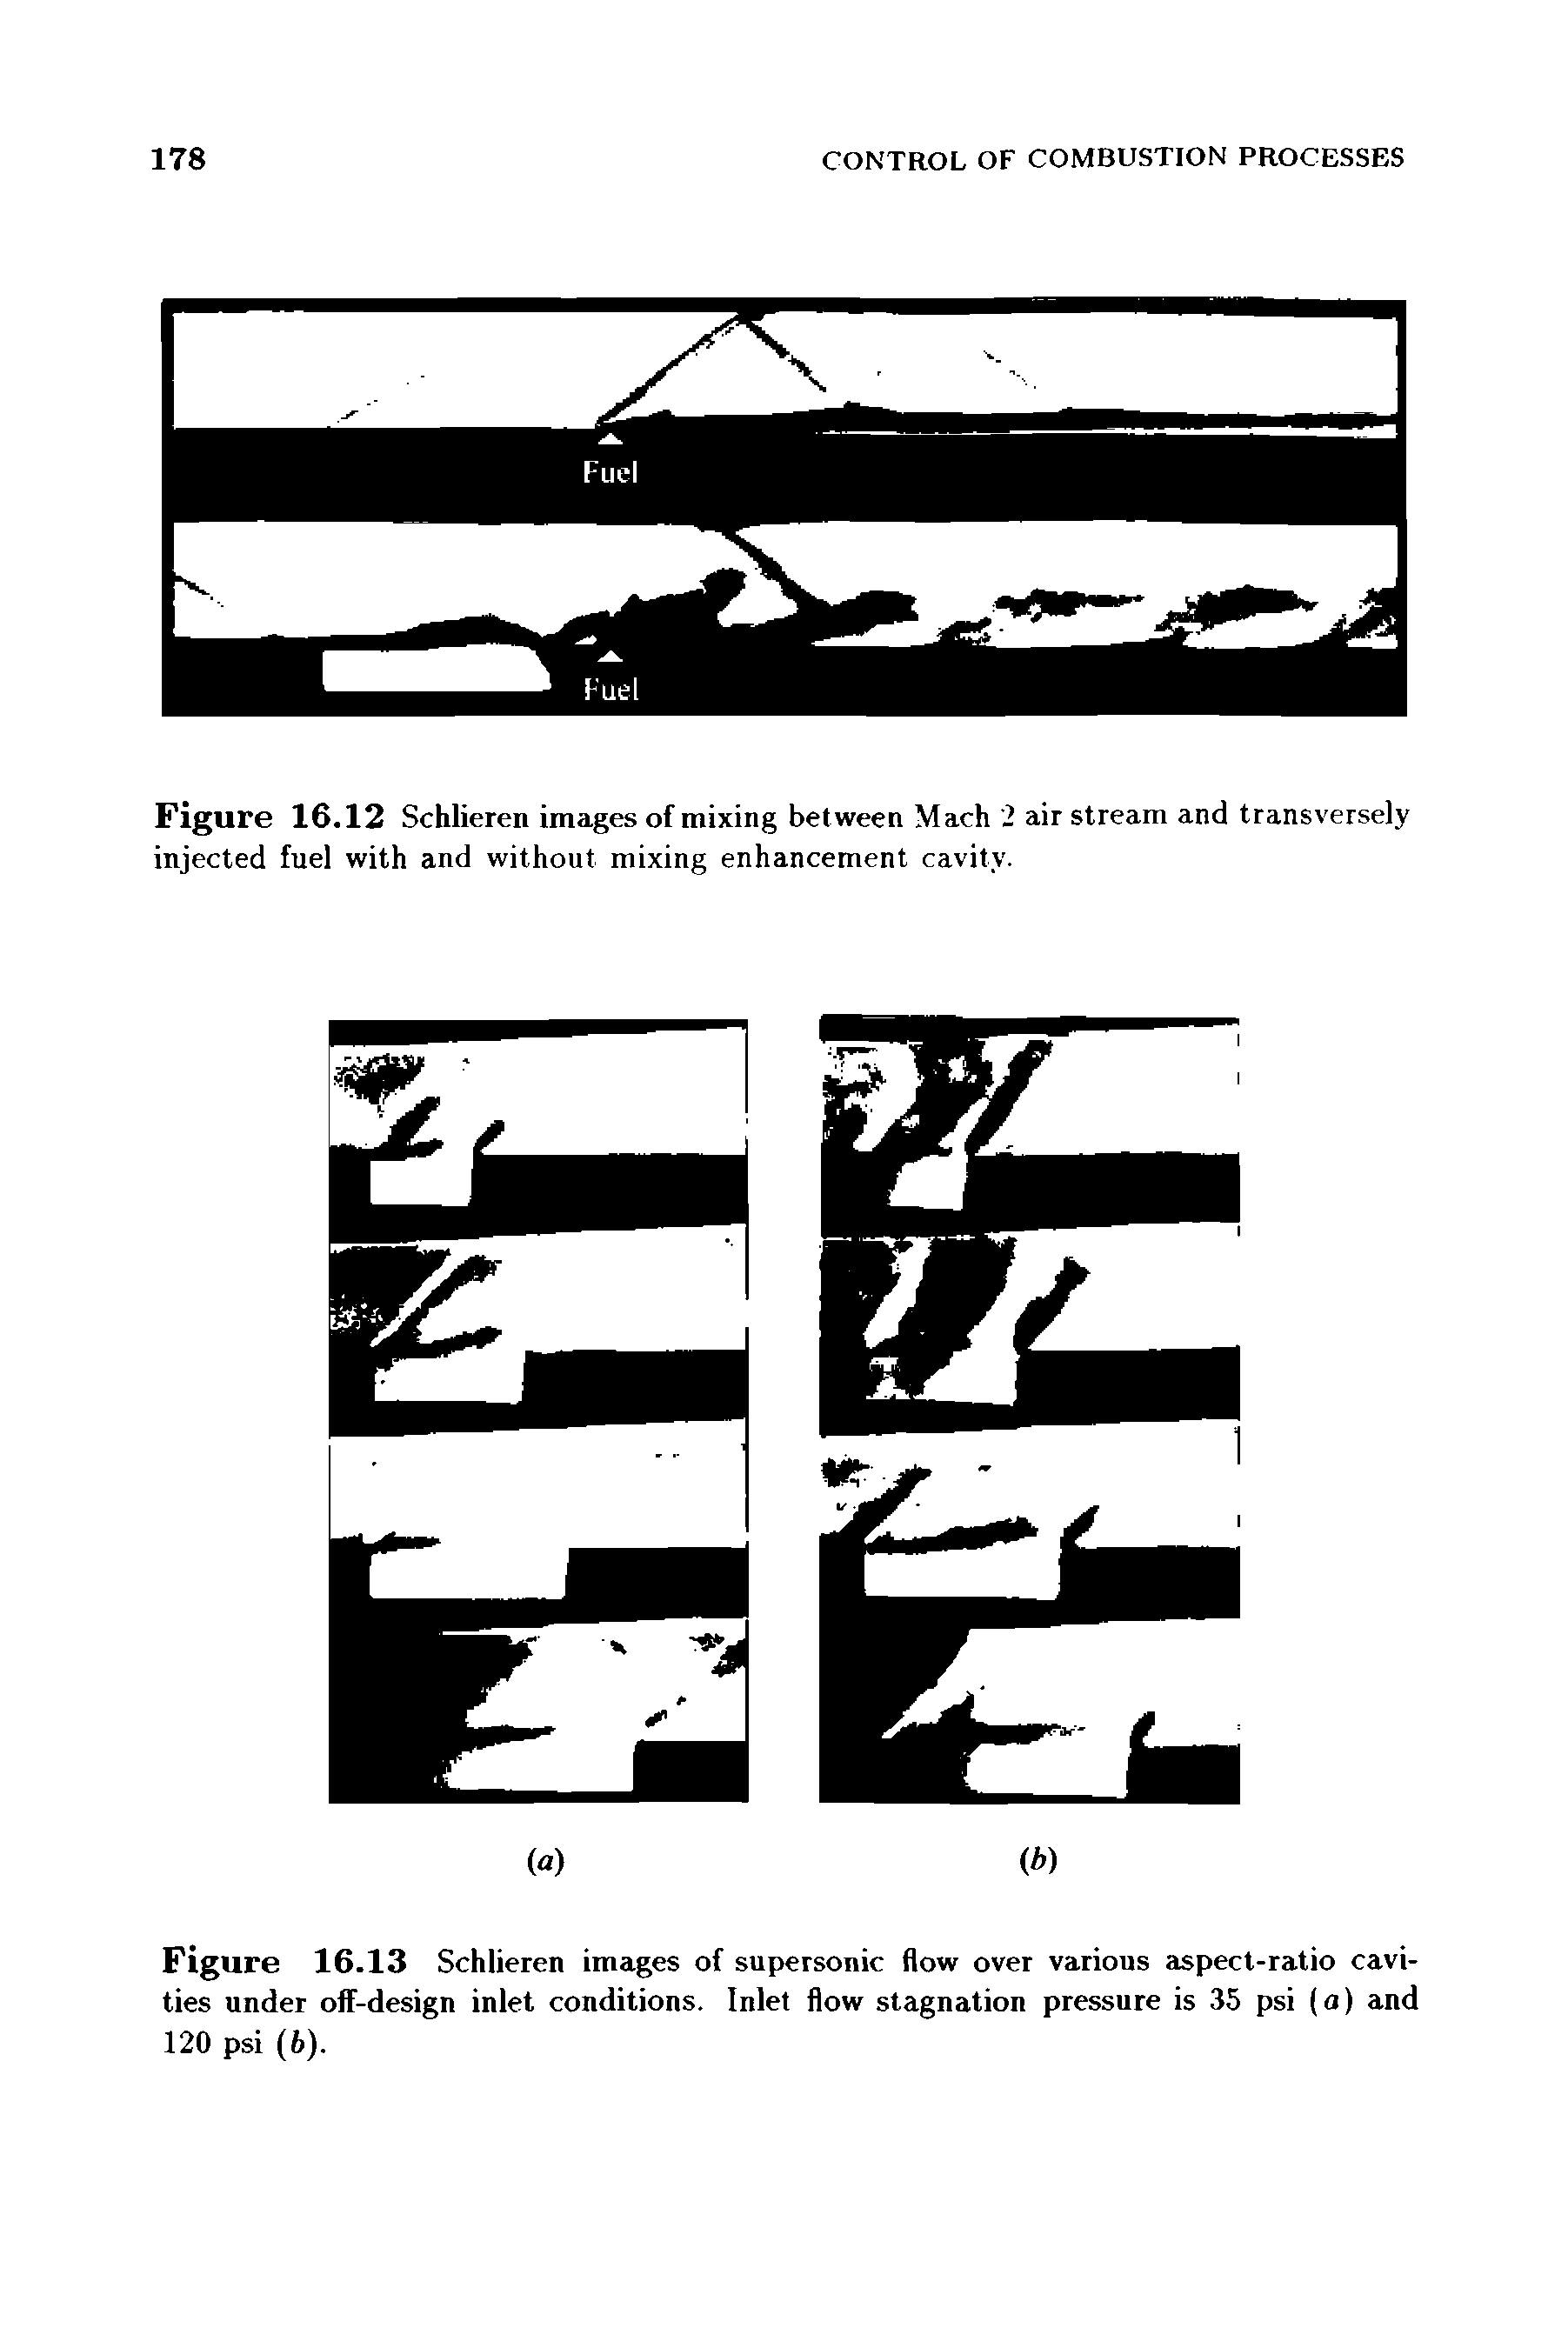 Figure 16.13 Schlieren images of supersonic flow over various aspect-ratio cavities under off-design inlet conditions. Inlet flow stagnation pressure is 35 psi (a) and 120 psi (6).